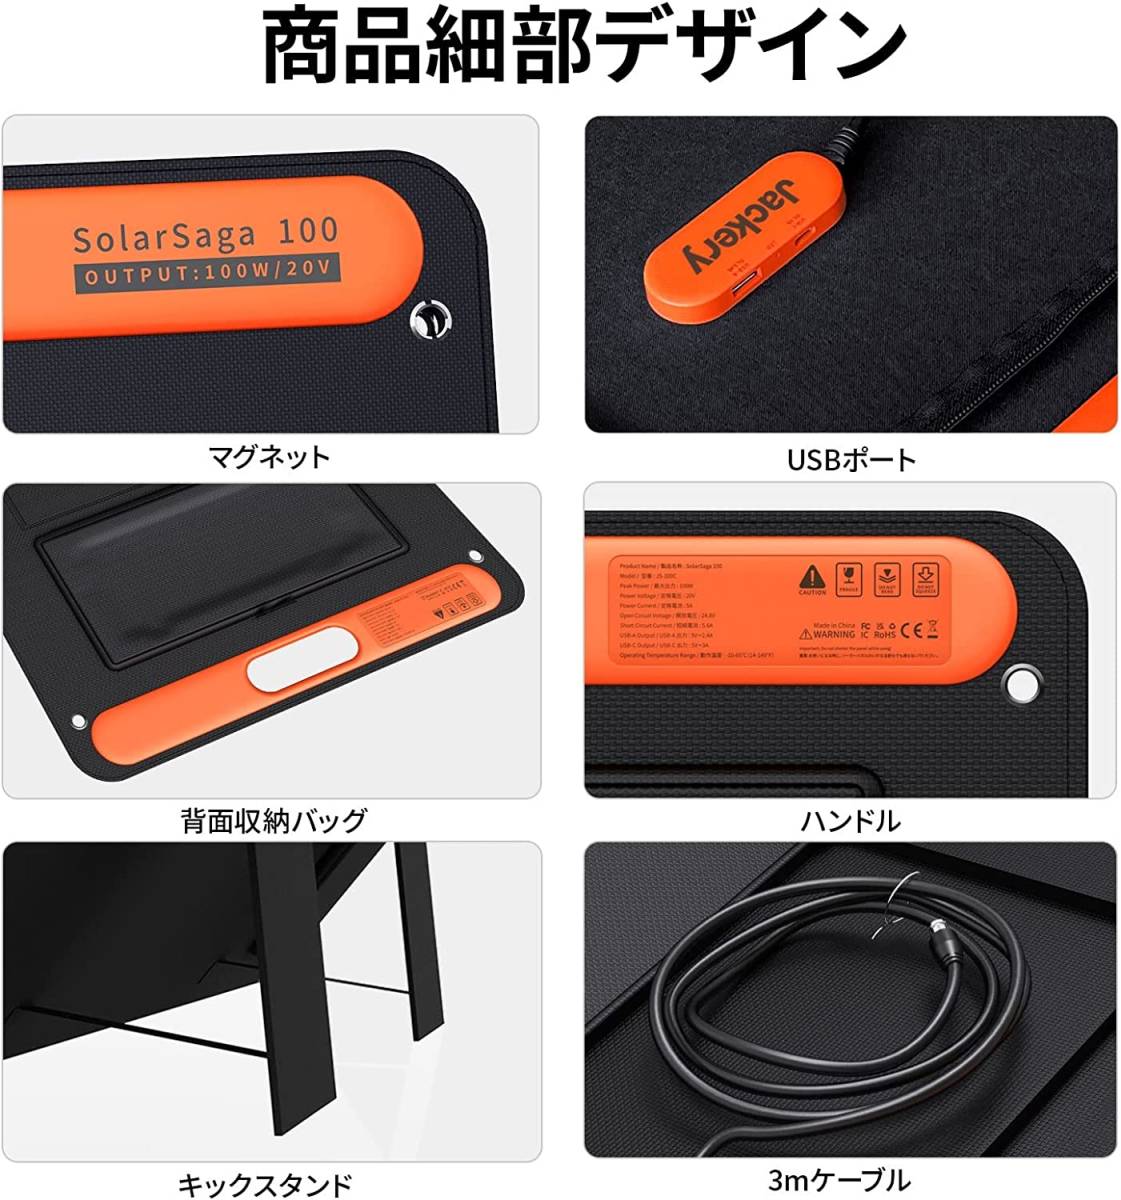  new goods official buy guarantee equipped Jackery portable power supply 708 & solar panel 100